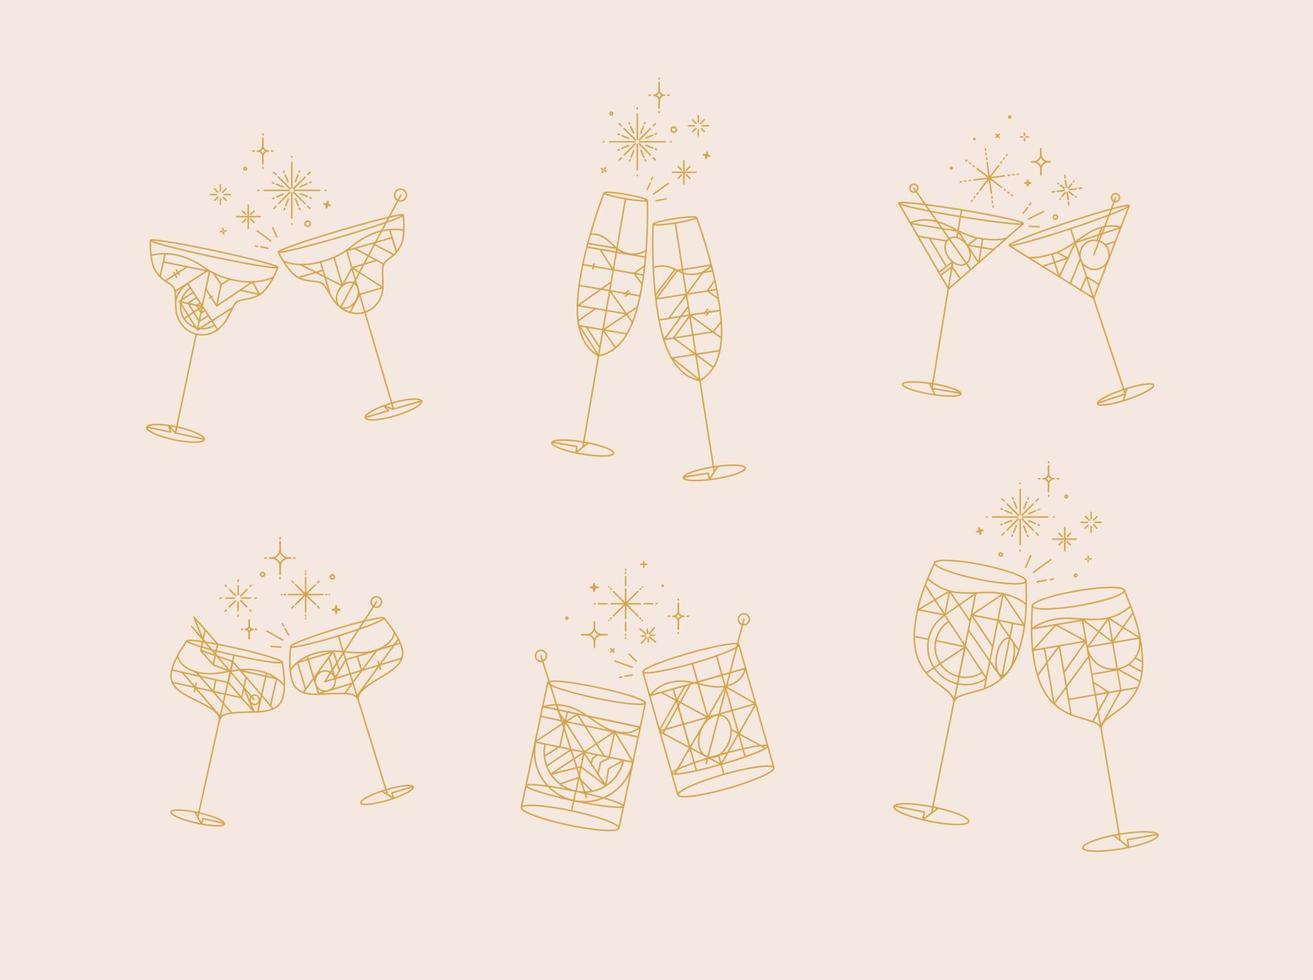 Cocktail glasses cheers for prosecco, wine, whiskey, vermouth, gin, martini, aperol, margarita in modern flat line style vector